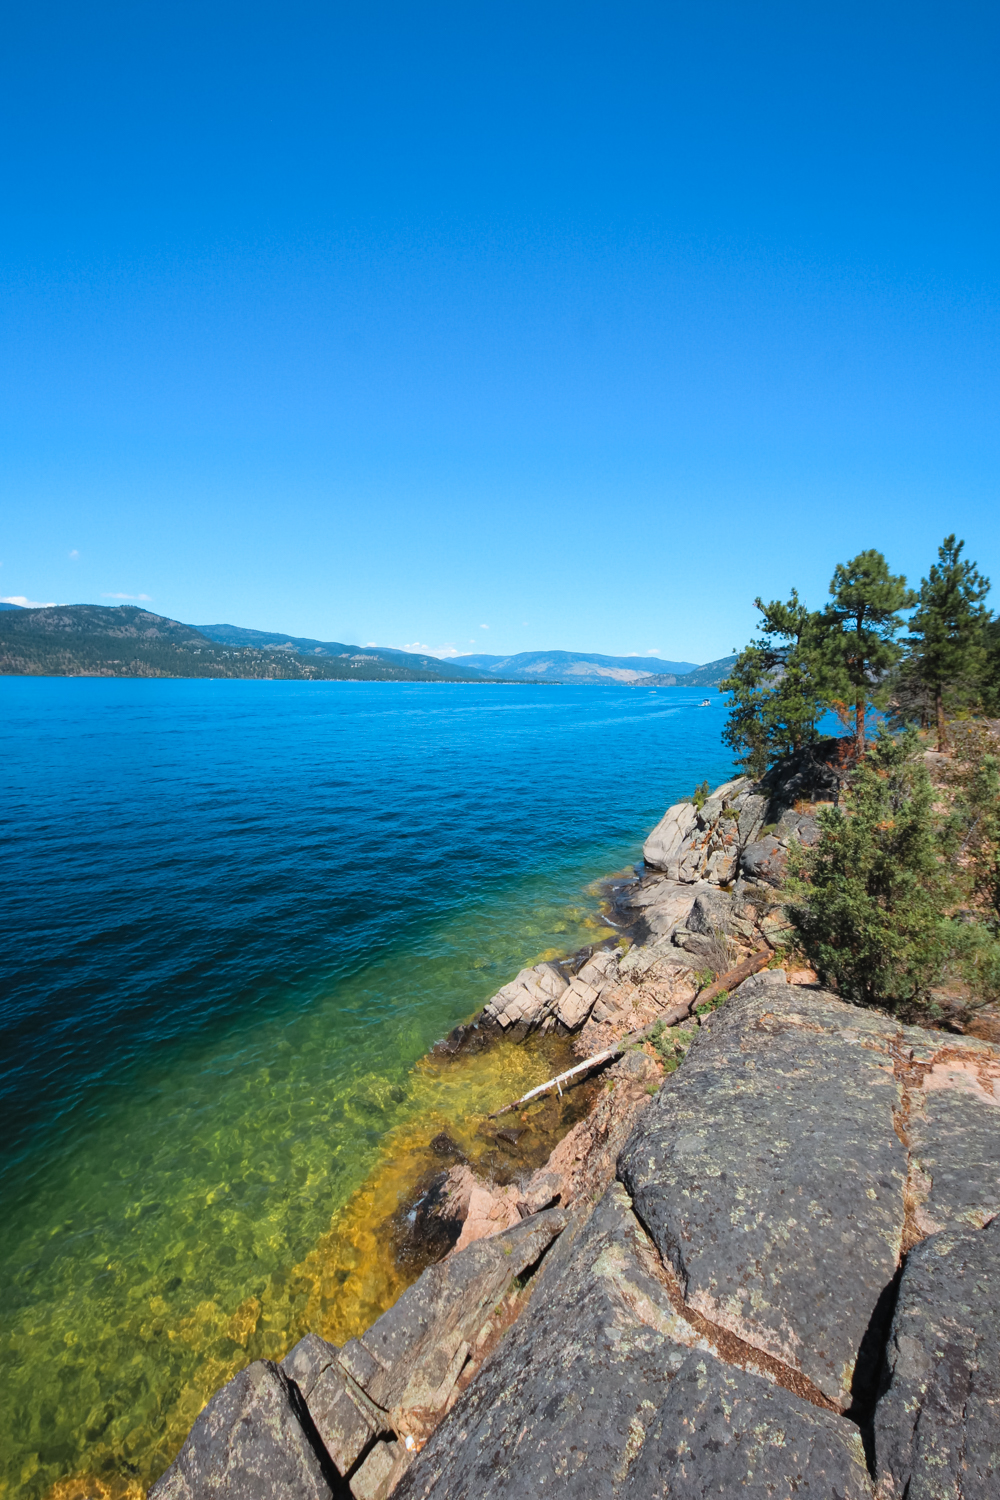 Rocky shorelines on Okanagan Lake. Water is a beautiful blue and green with a blue sky. No clouds.